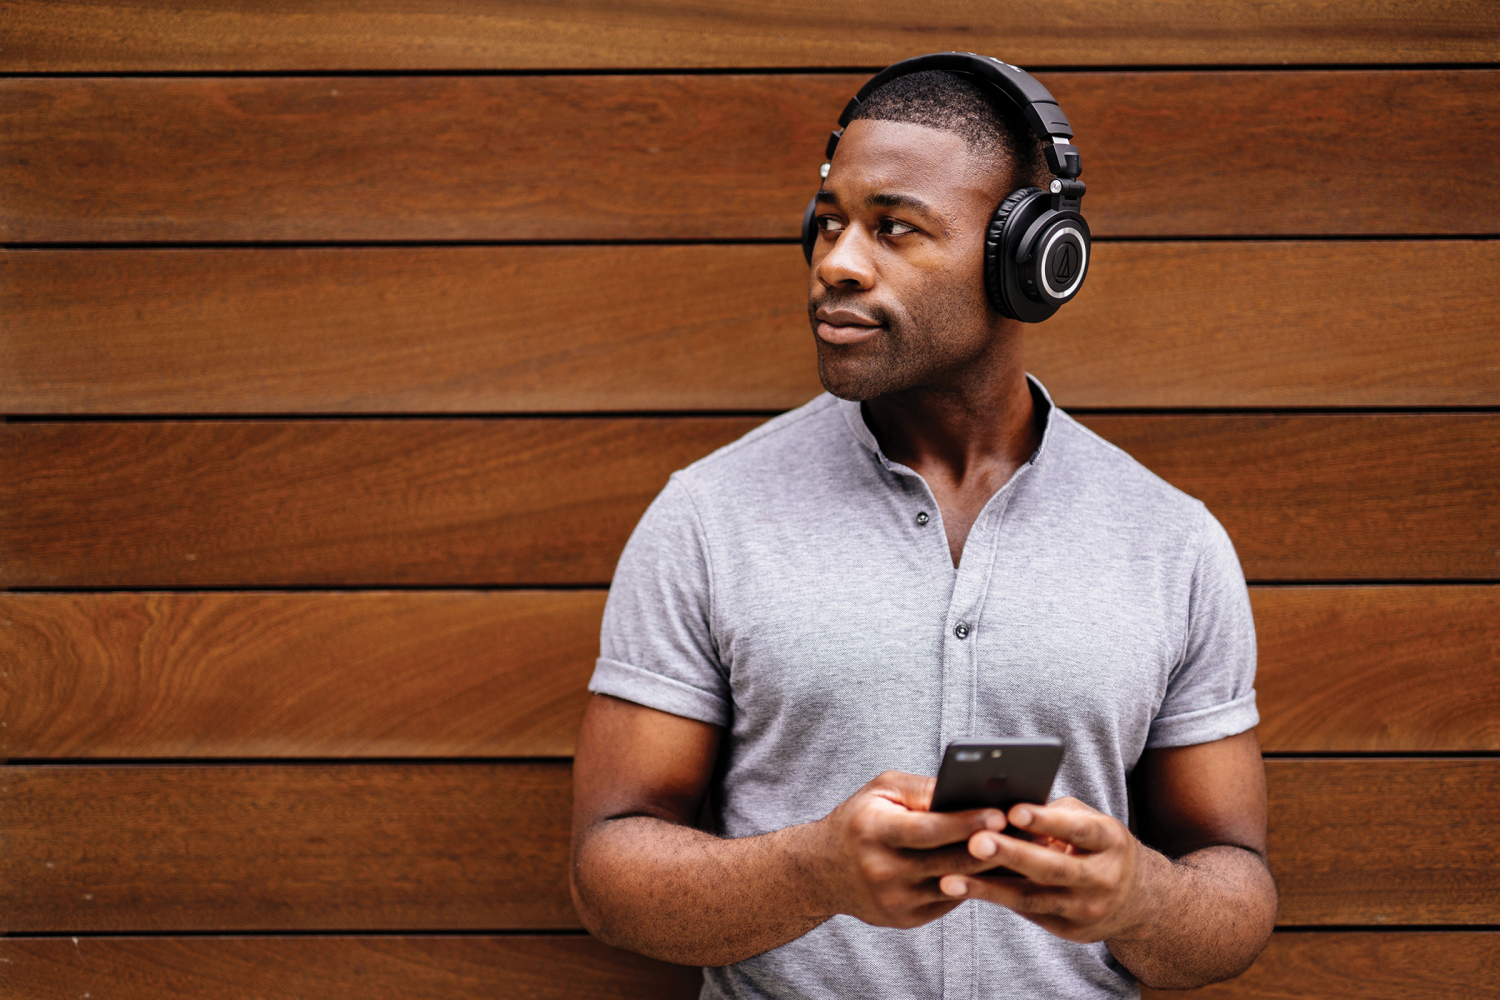 Audio-Technica ATH-M50xBT lifestyle image of man wearing headphones while he leans against a paneled wood wall.